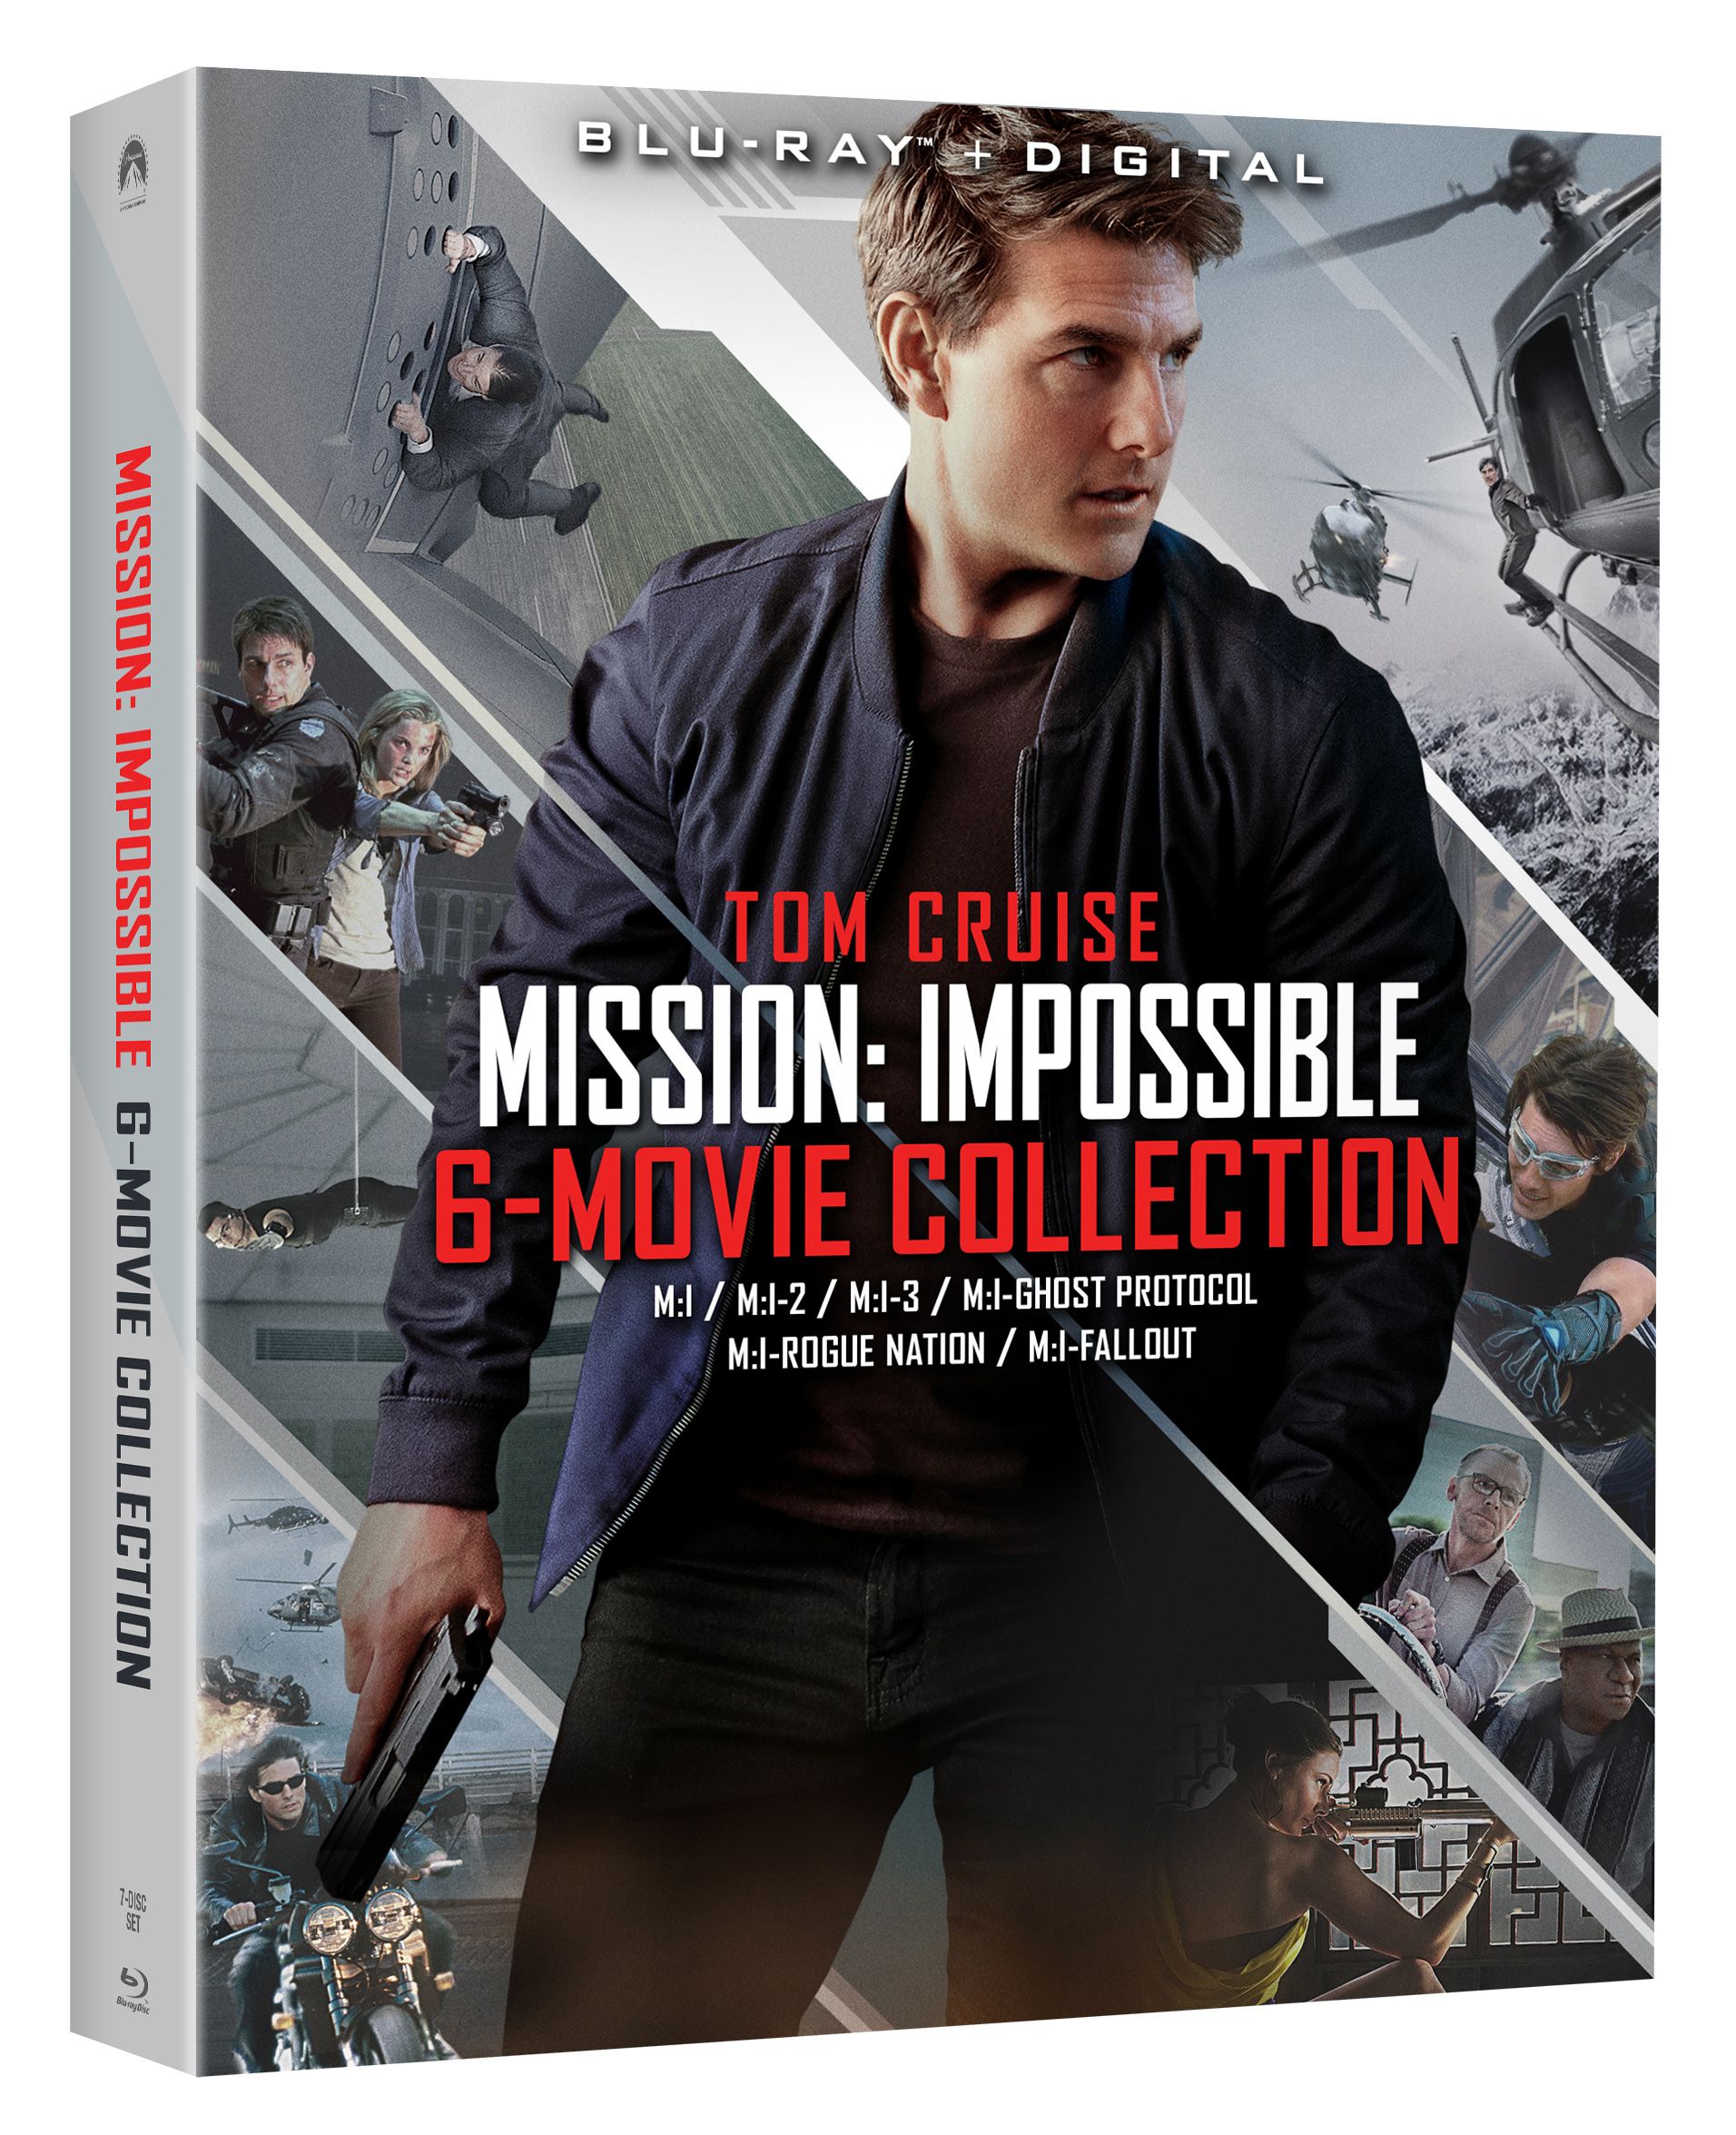 Mission Impossible 6-Movie Collection Blu-ray